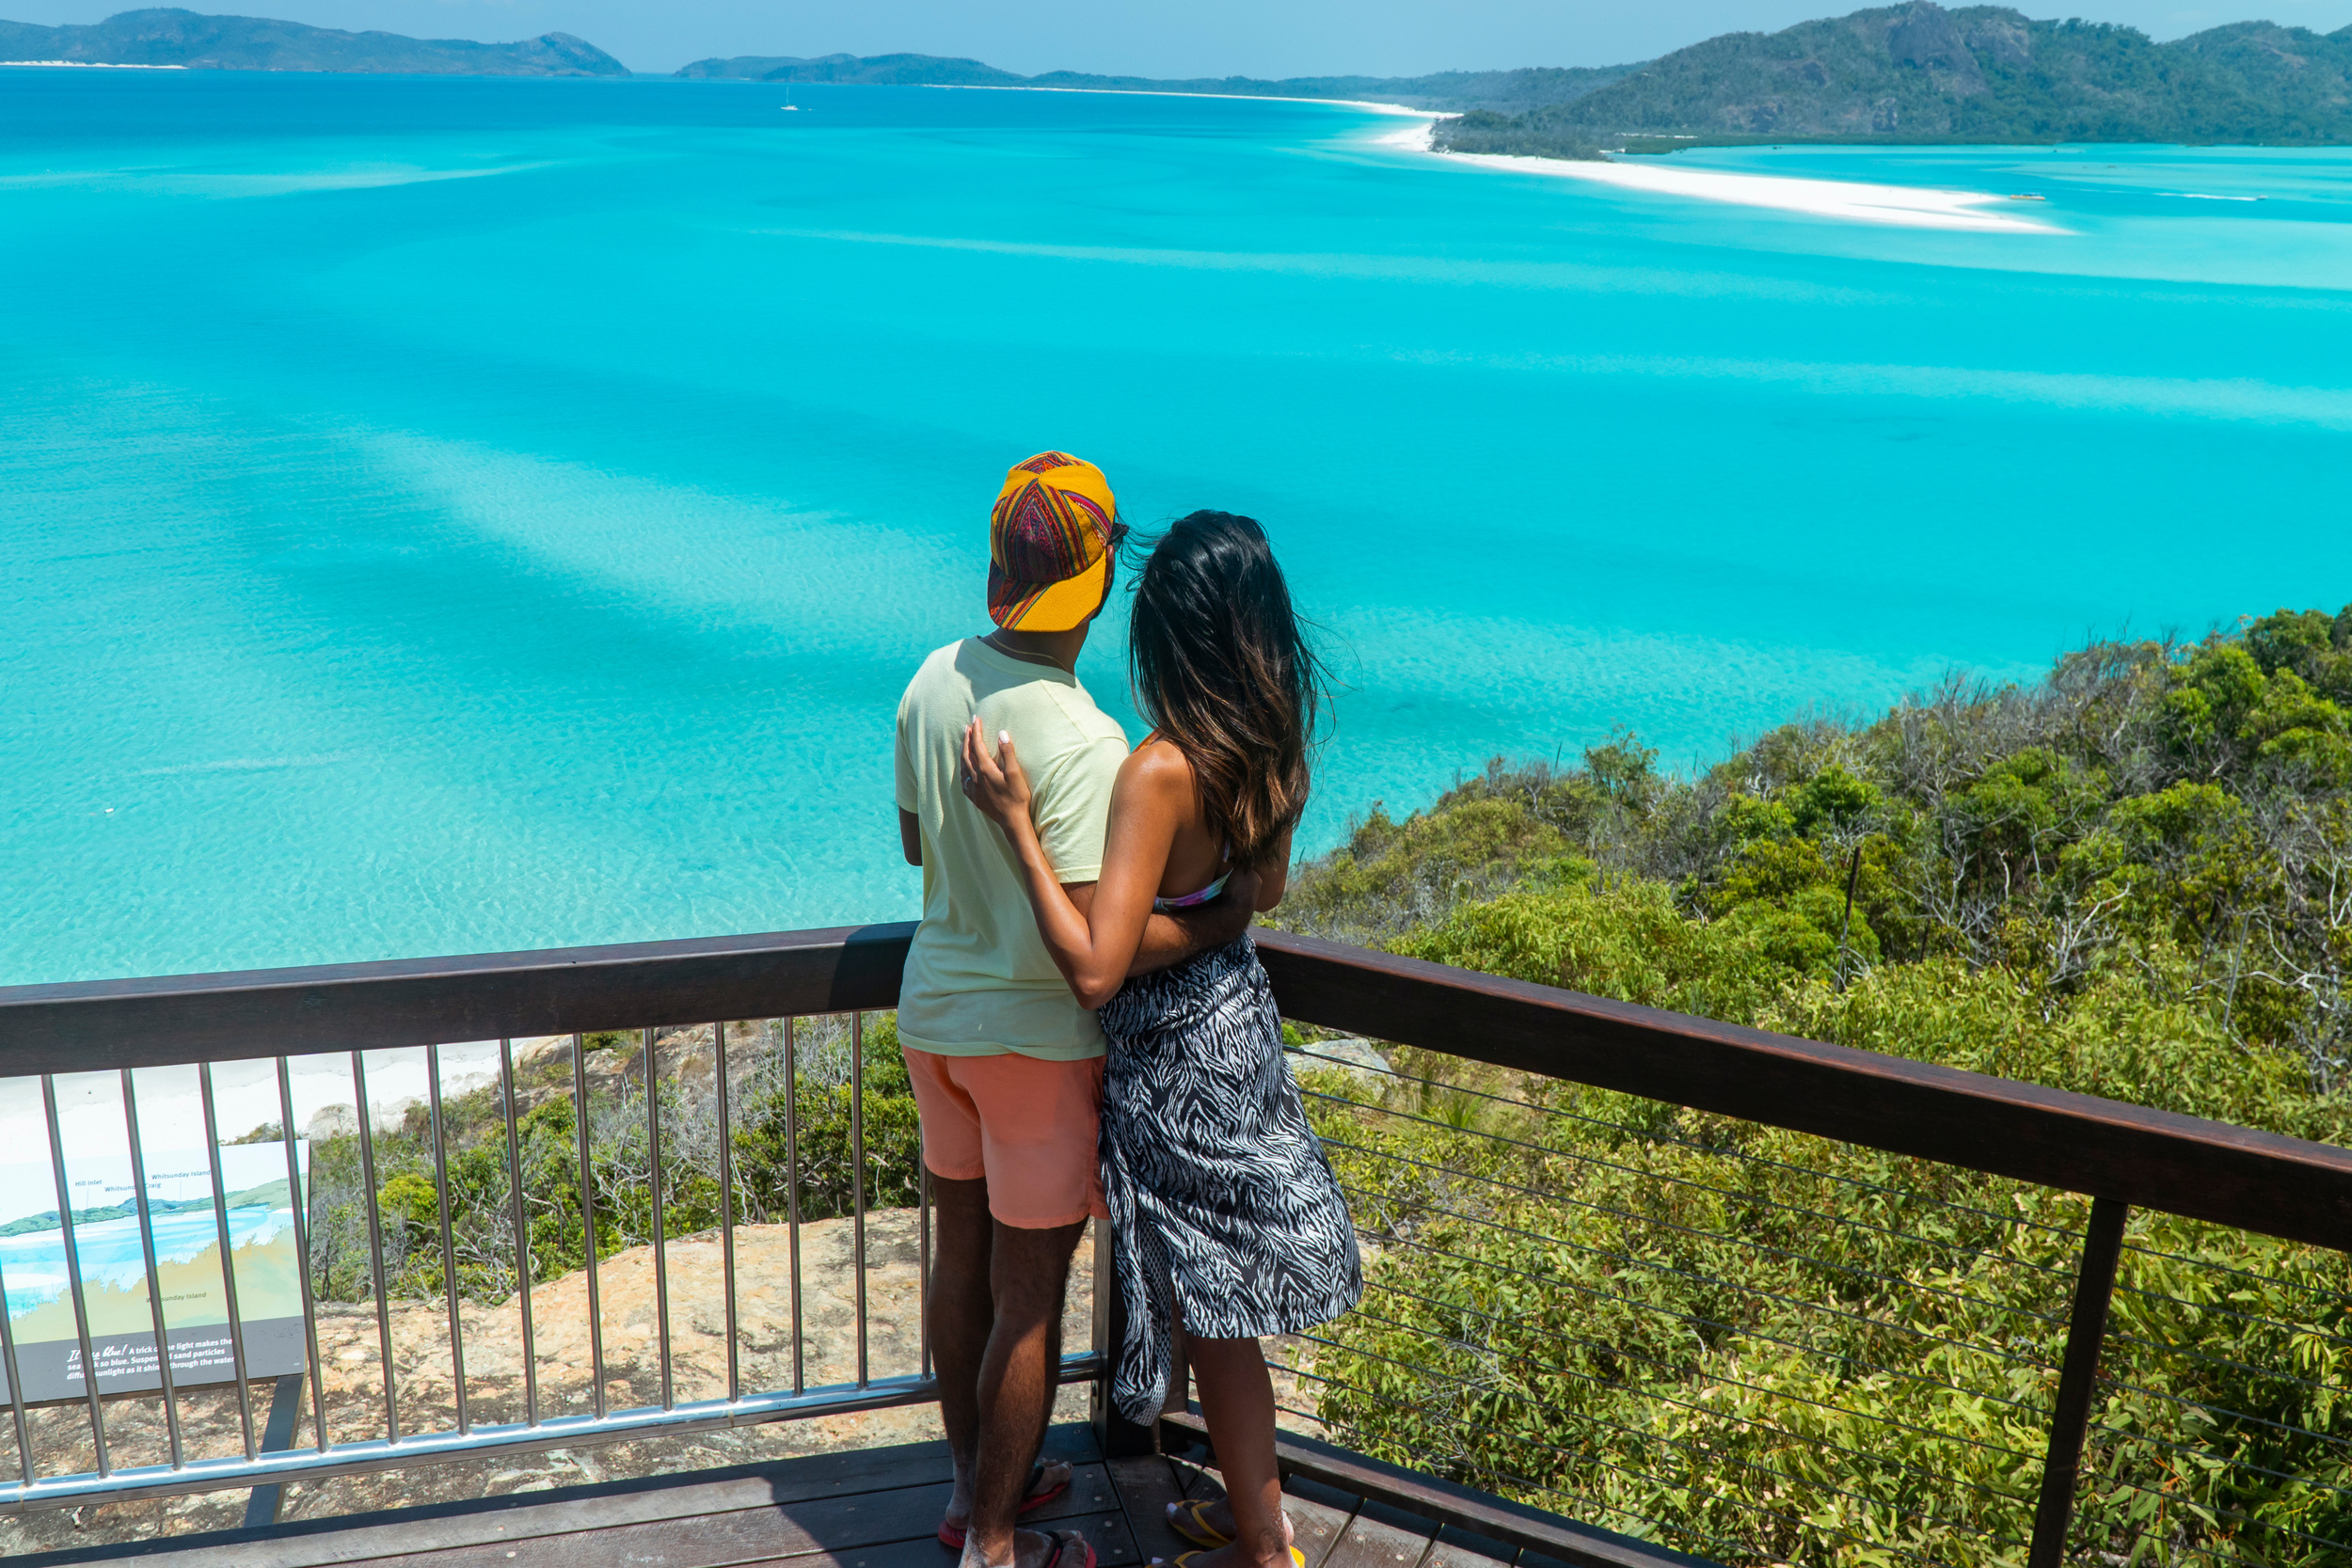 <p>Off the coast of Queensland lies the Whitsundays, idyllic escapes for those looking for a tranquil vacation. White sand beaches, electric blue water, and fewer crowds await you.</p><p>You may also like: <a href='https://www.yardbarker.com/lifestyle/articles/20_ways_to_refresh_your_style_without_spending_a_fortune_012224/s1__38890348'>20 ways to refresh your style without spending a fortune</a></p>